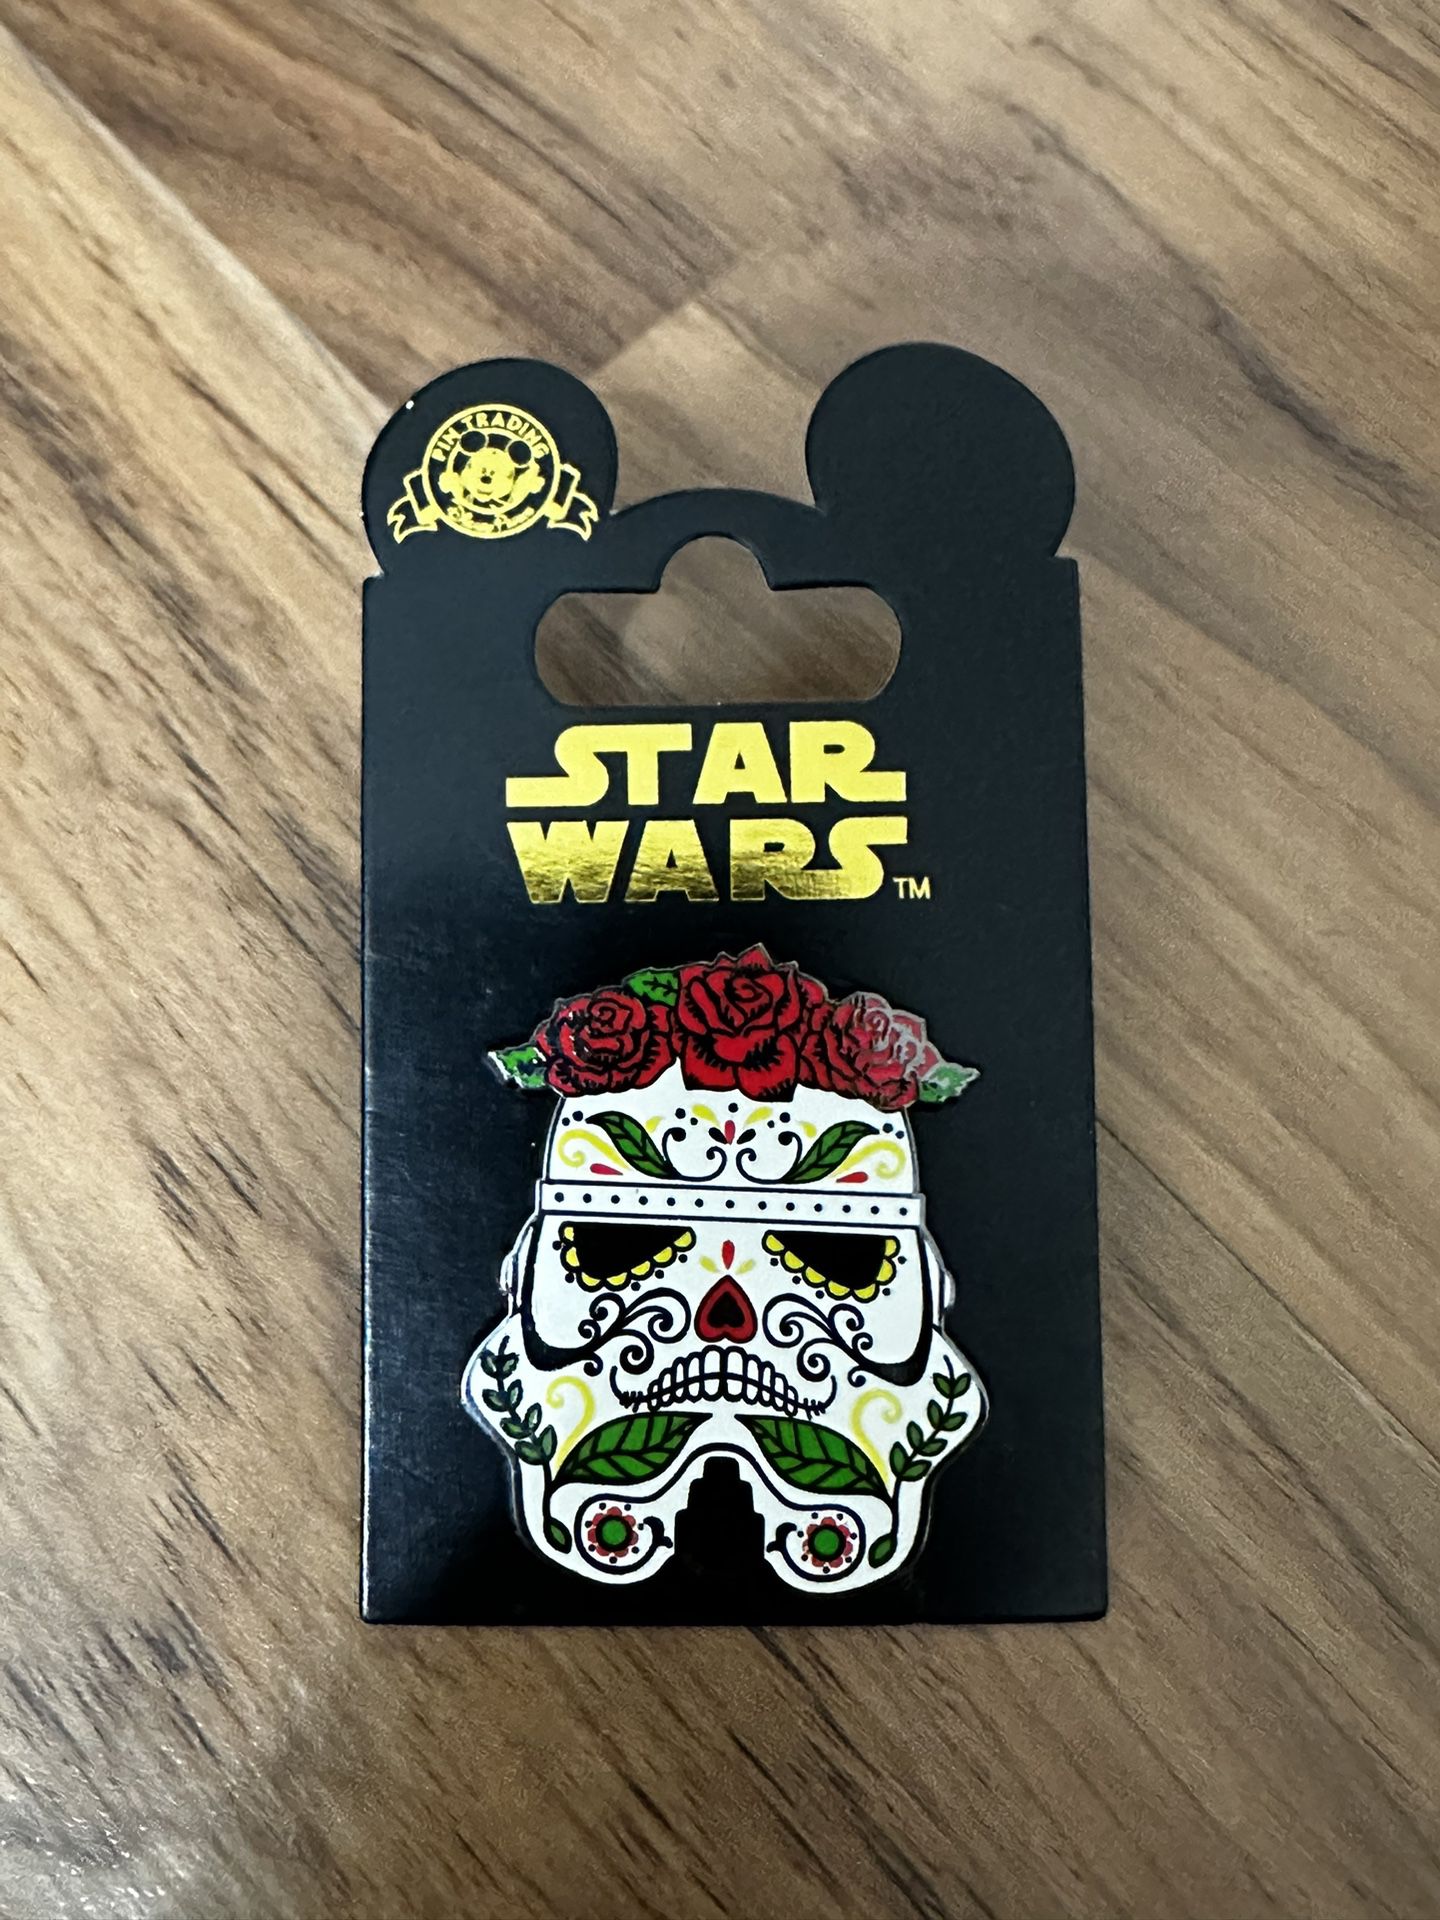 Star Wars “Day Of The Dead” Pin